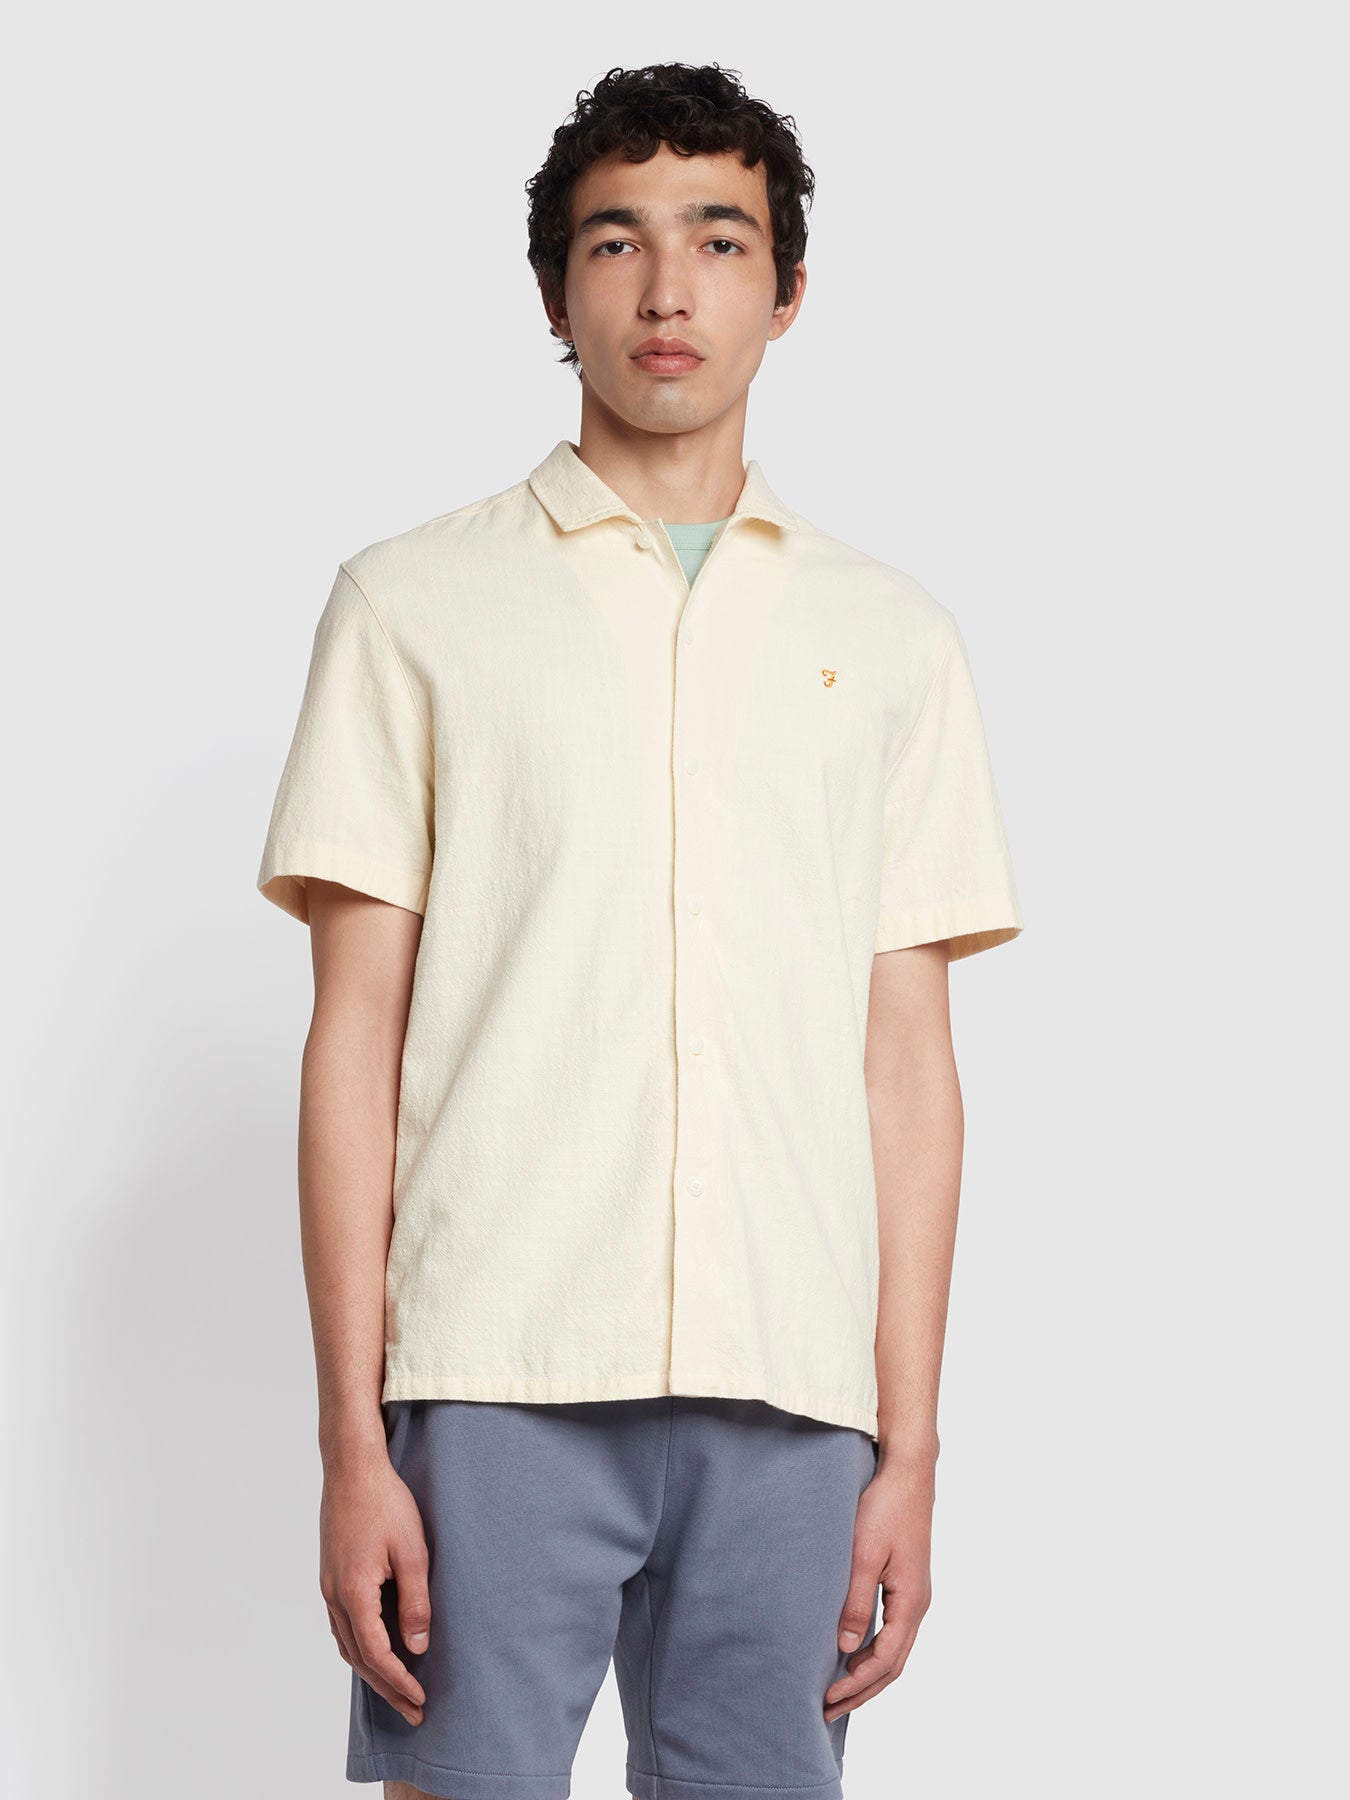 Farah Cresswell Casual Fit Short Sleeve Organic Cotton Shirt In Beige